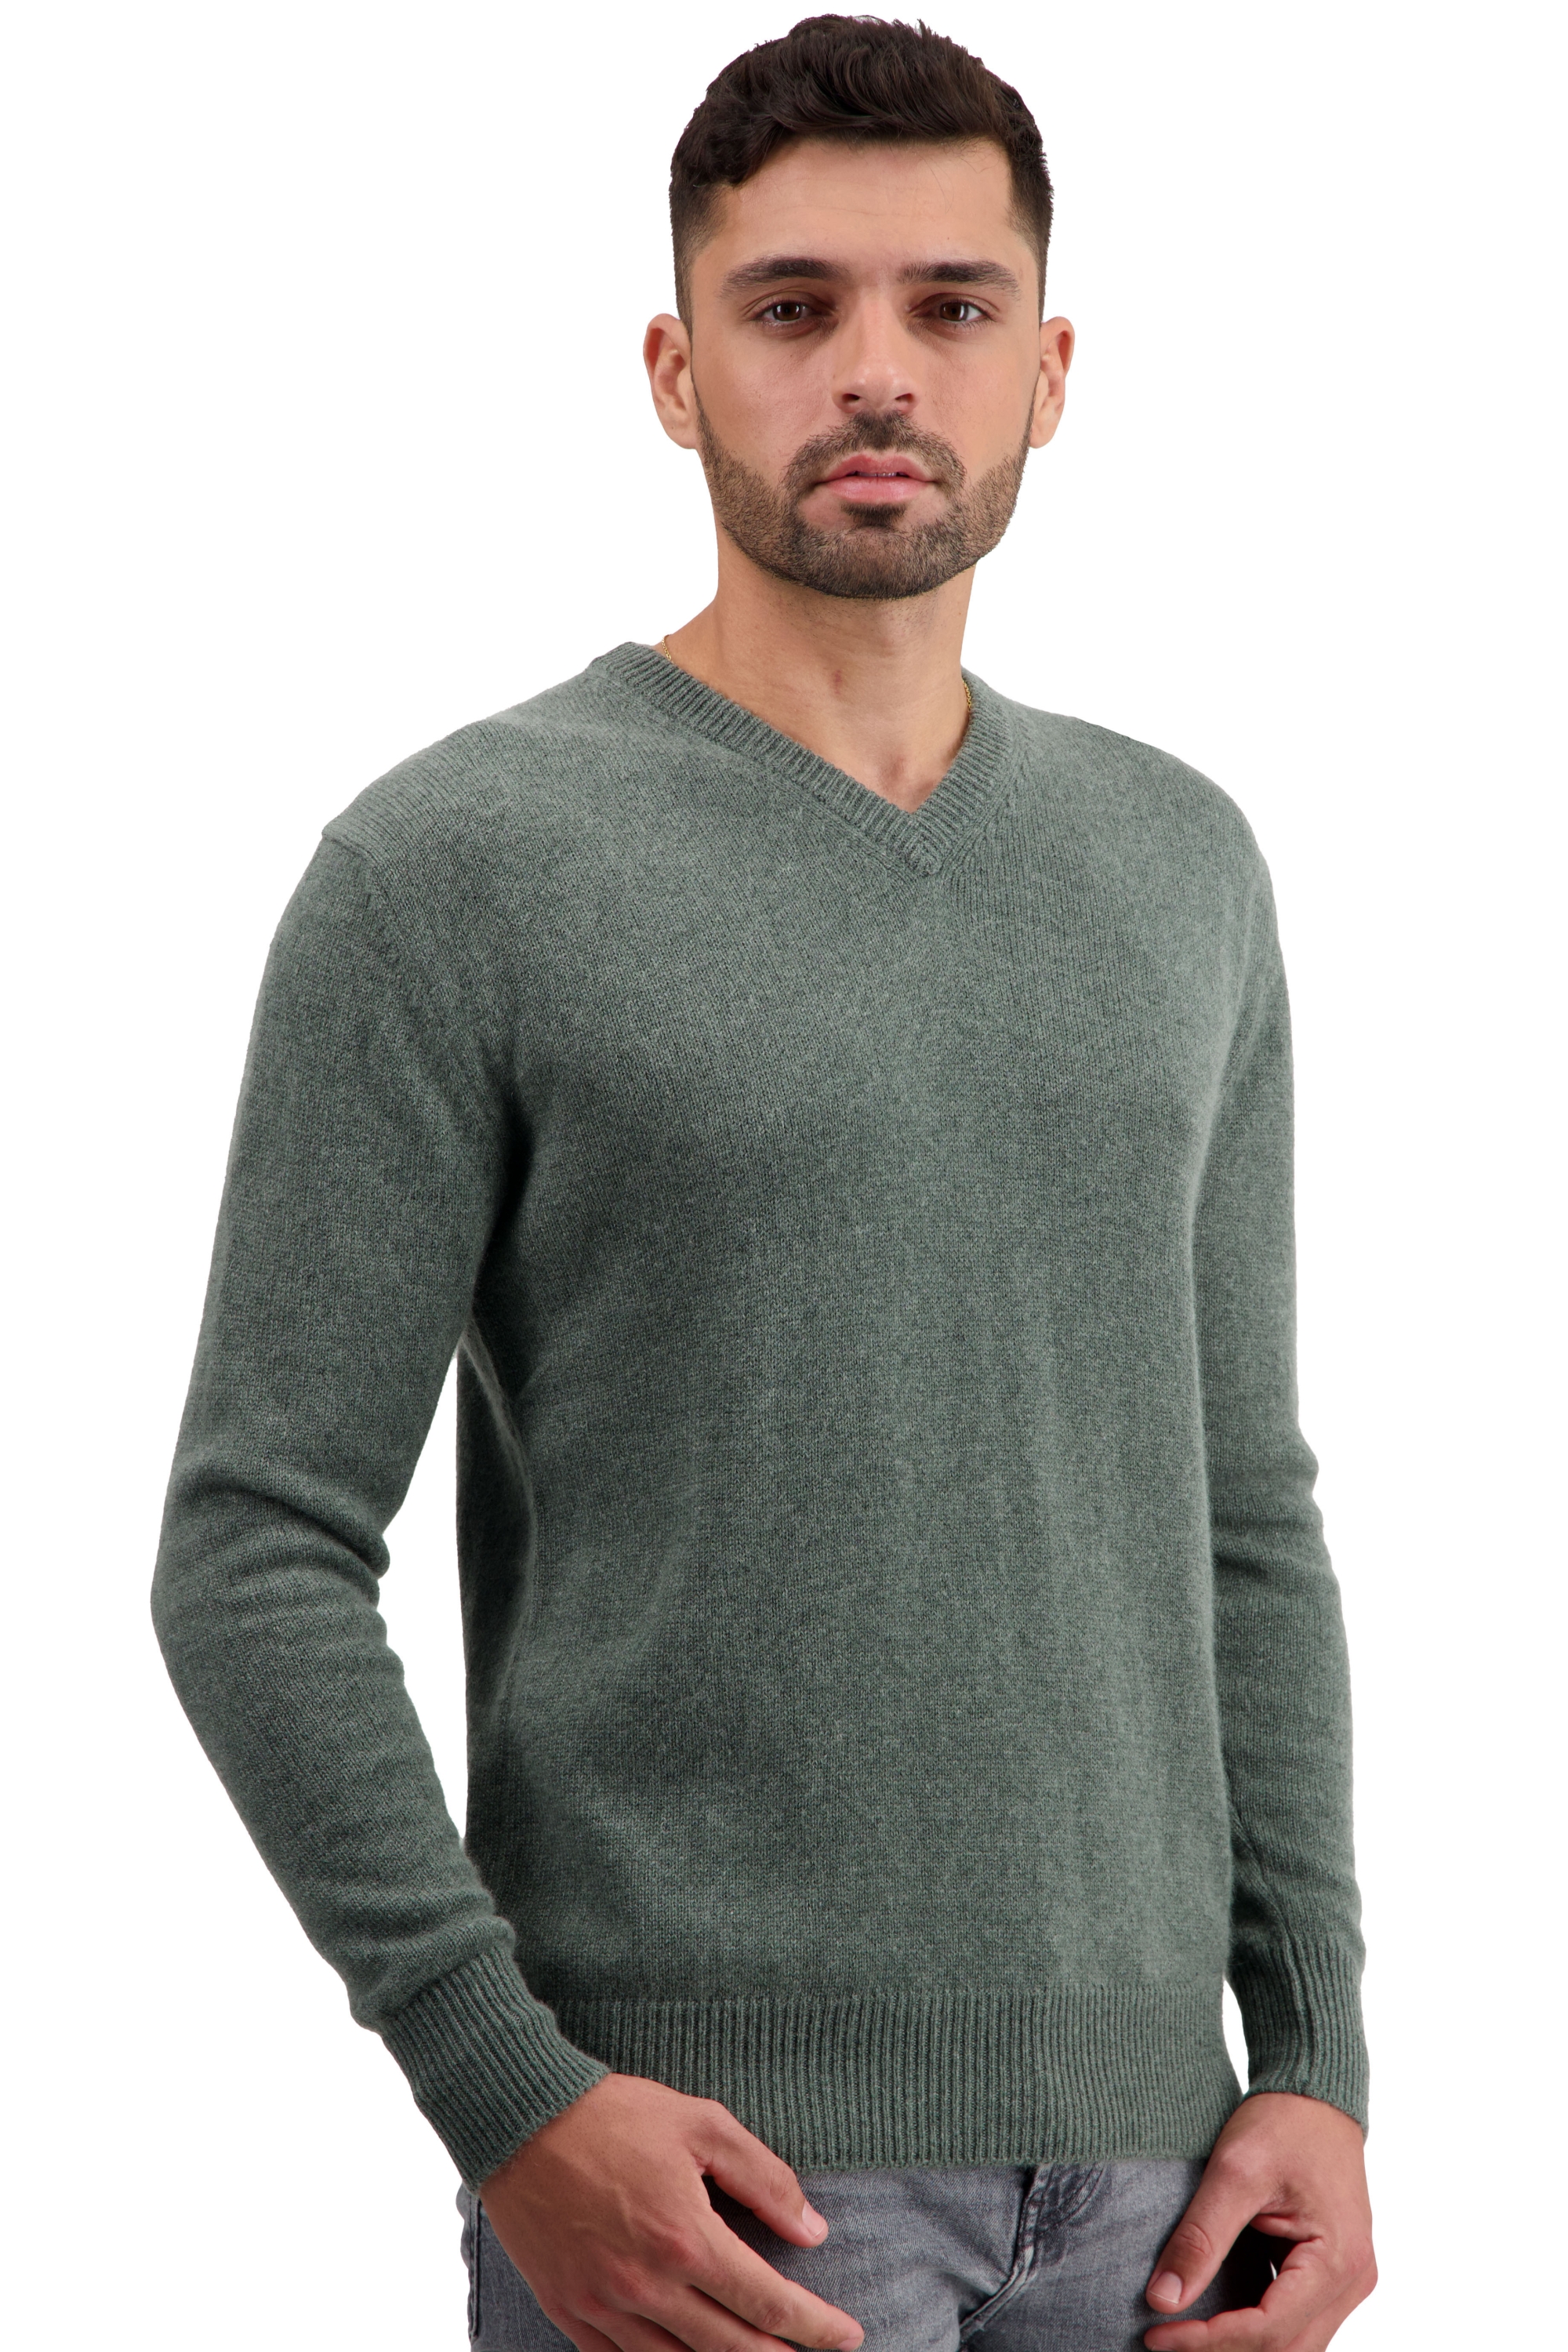 Cashmere men basic sweaters at low prices tour first military green l